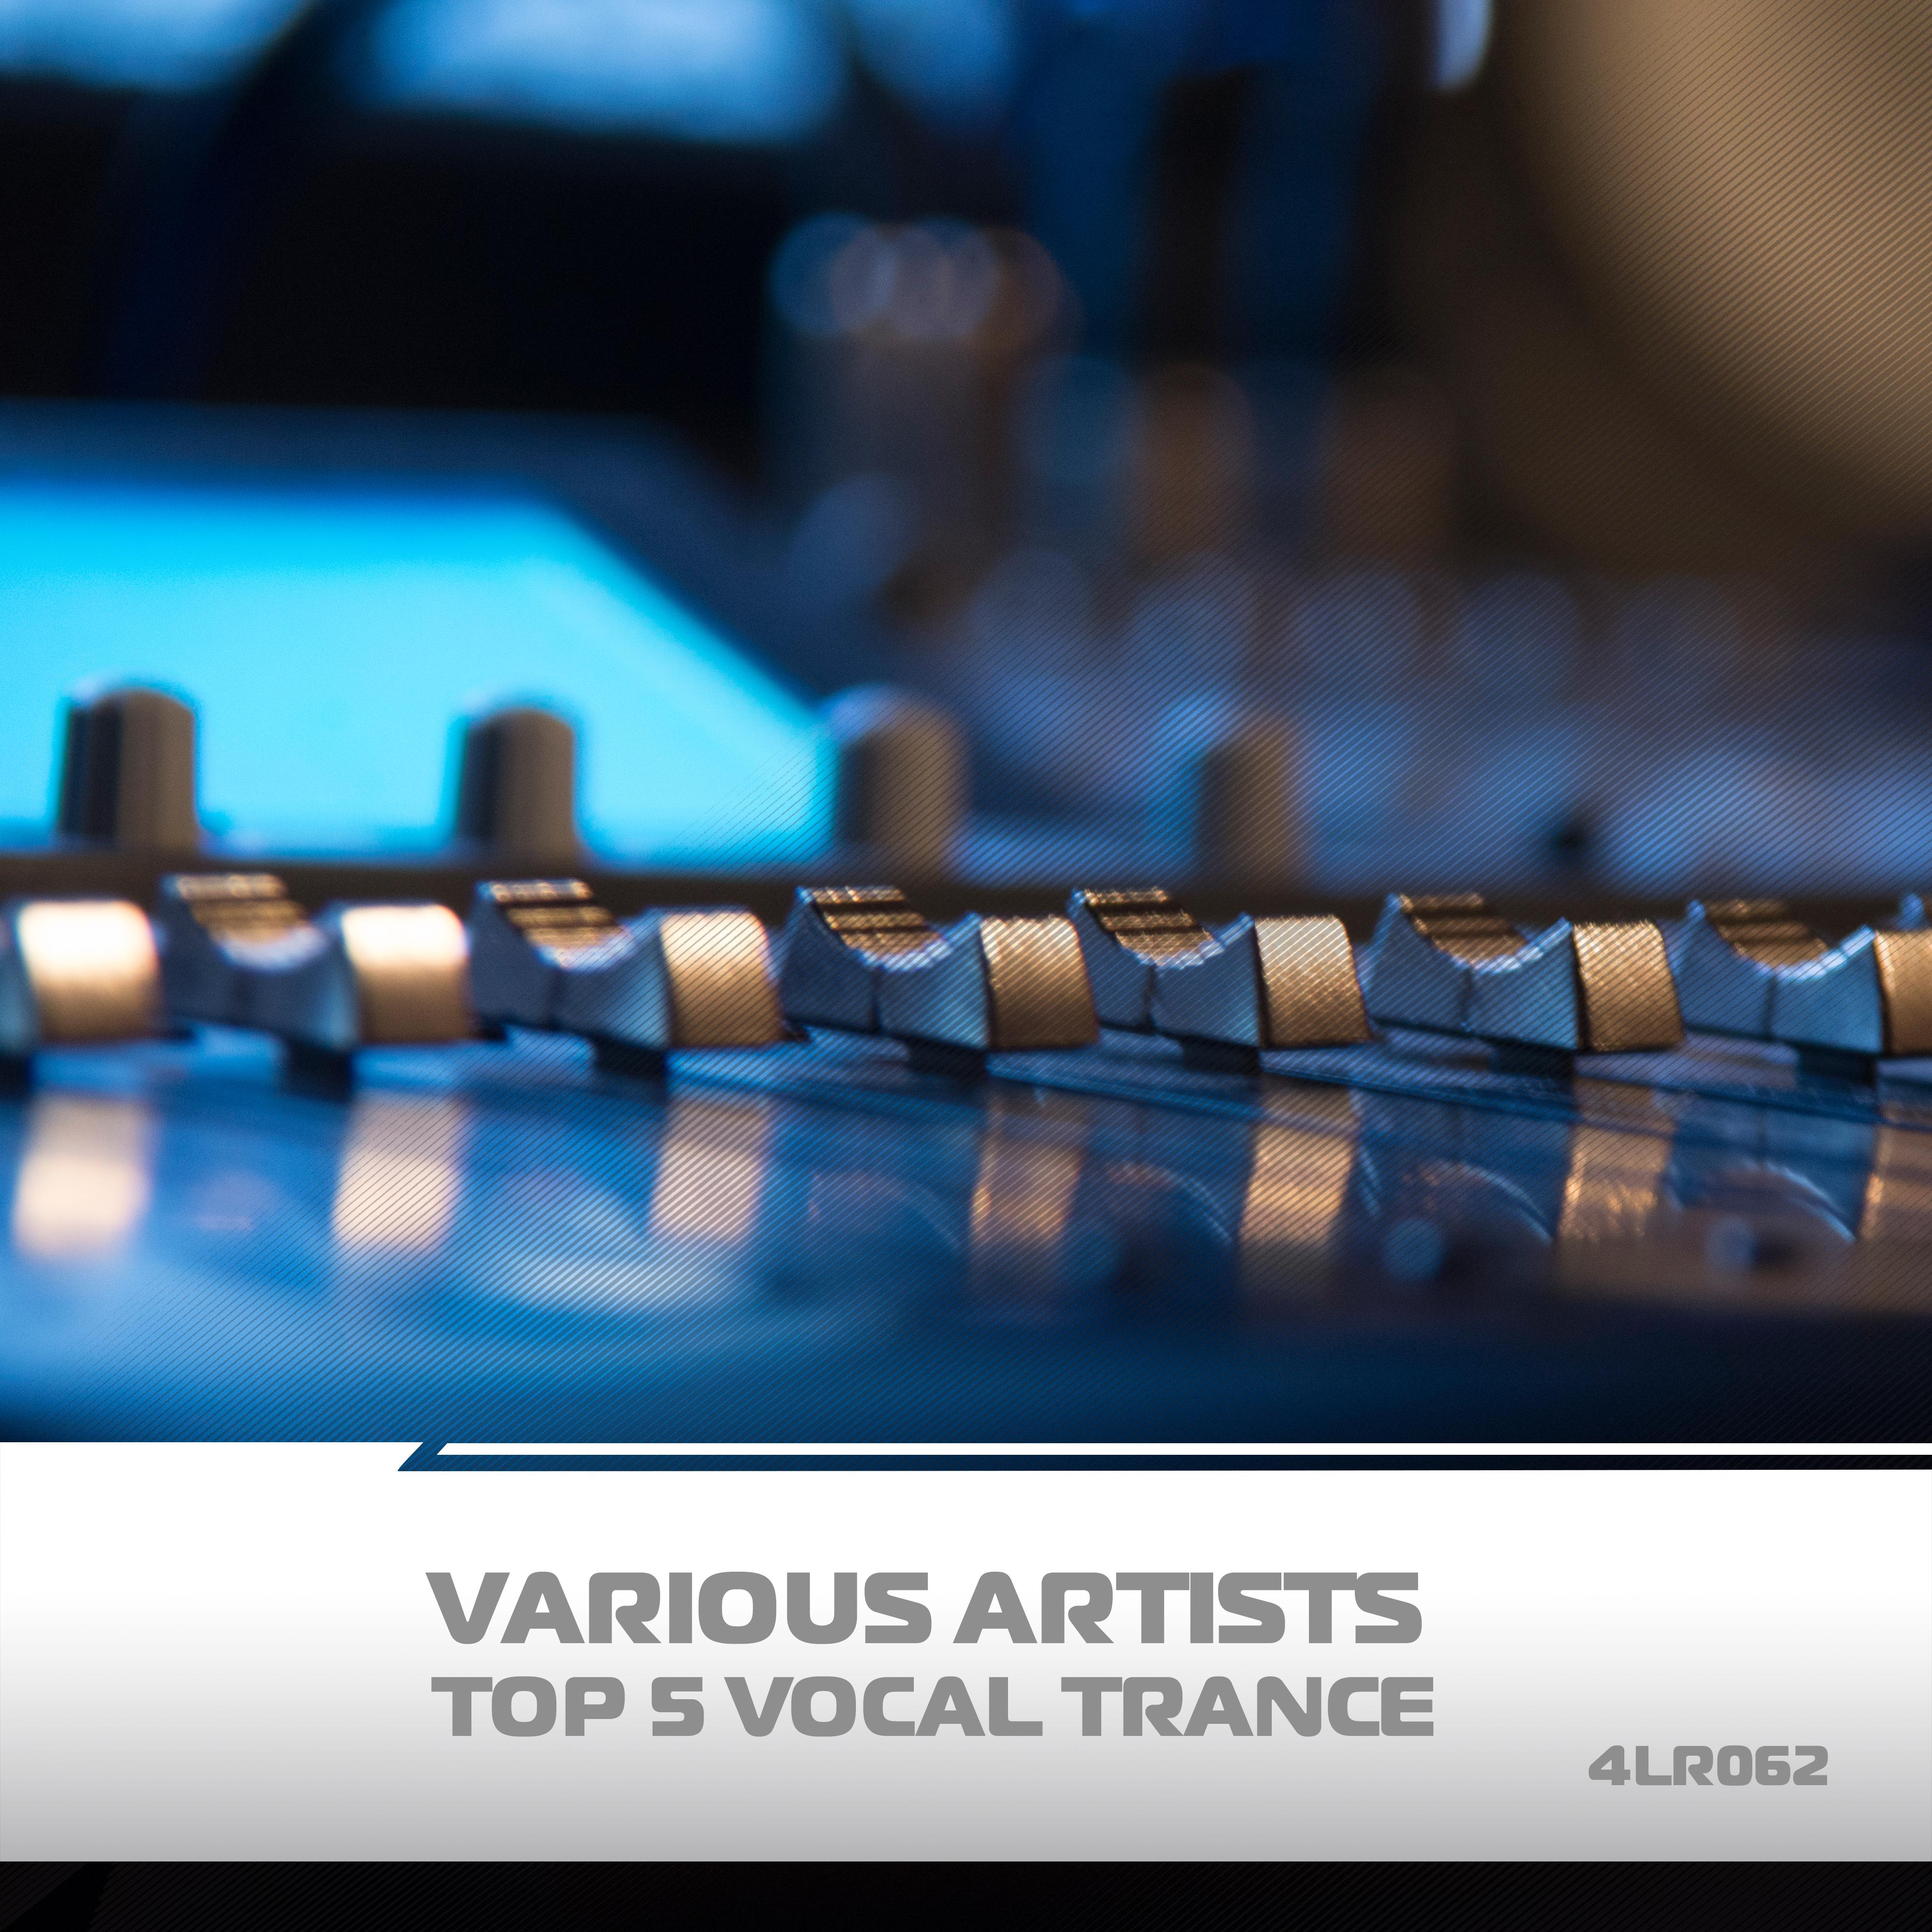 Top 5 Vocal Trance